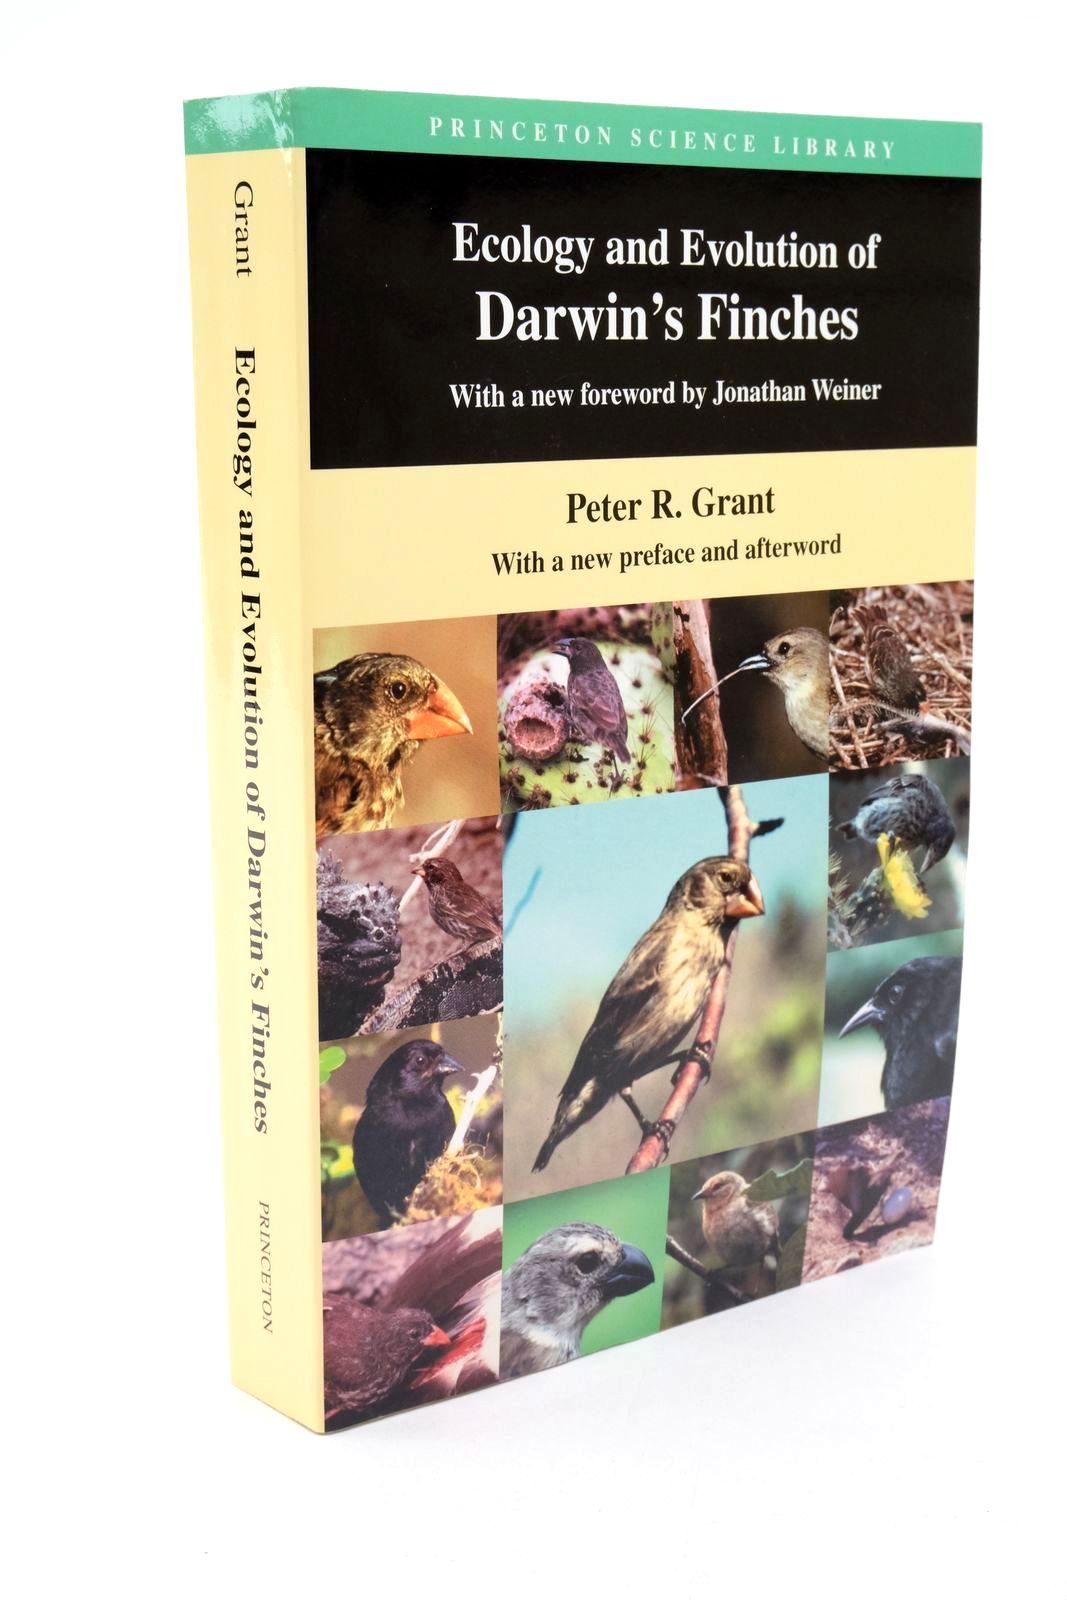 Photo of ECOLOGY AND EVOLUTION OF DARWIN'S FINCHES written by Grant, Peter R. published by Princeton University Press (STOCK CODE: 1322653)  for sale by Stella & Rose's Books